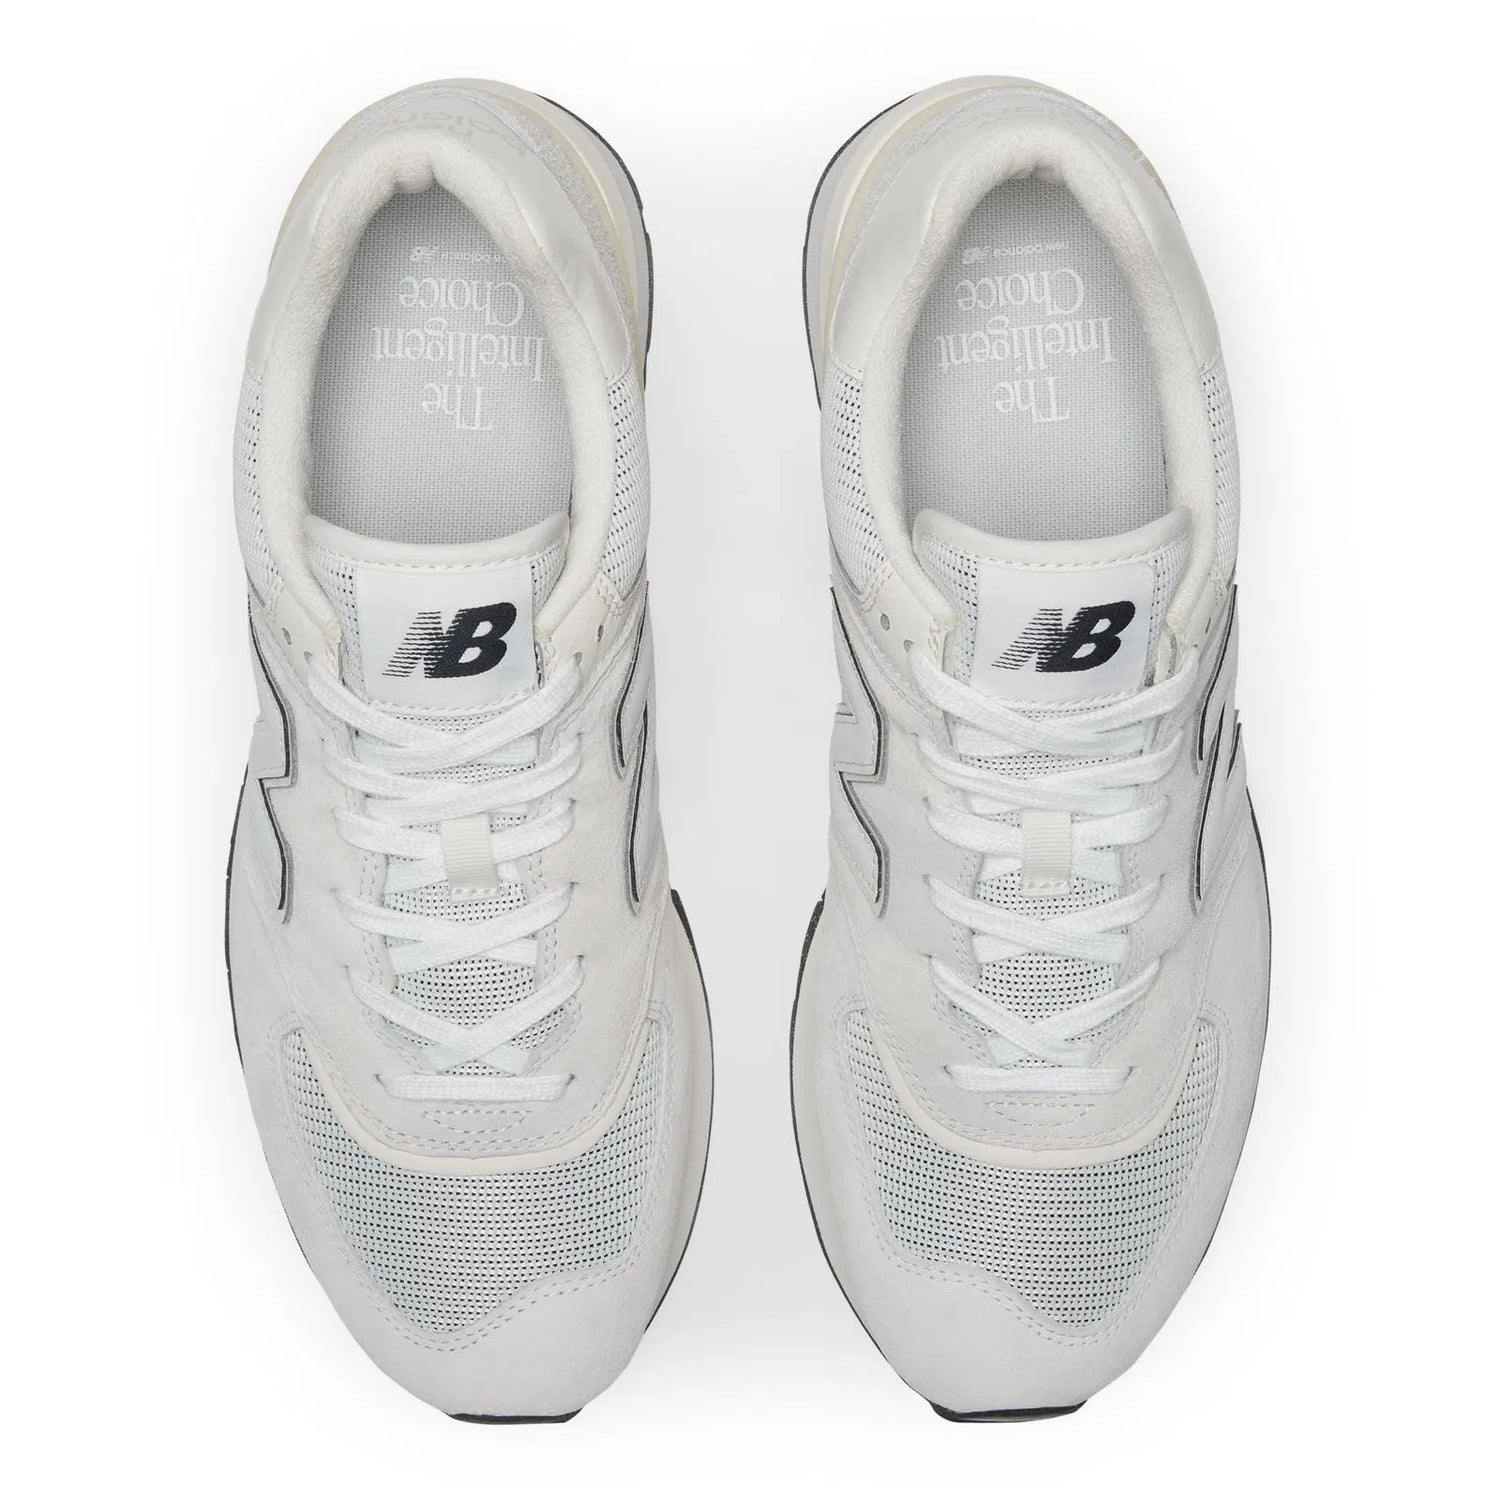 New Balance 574 Grey with White-LOTABY